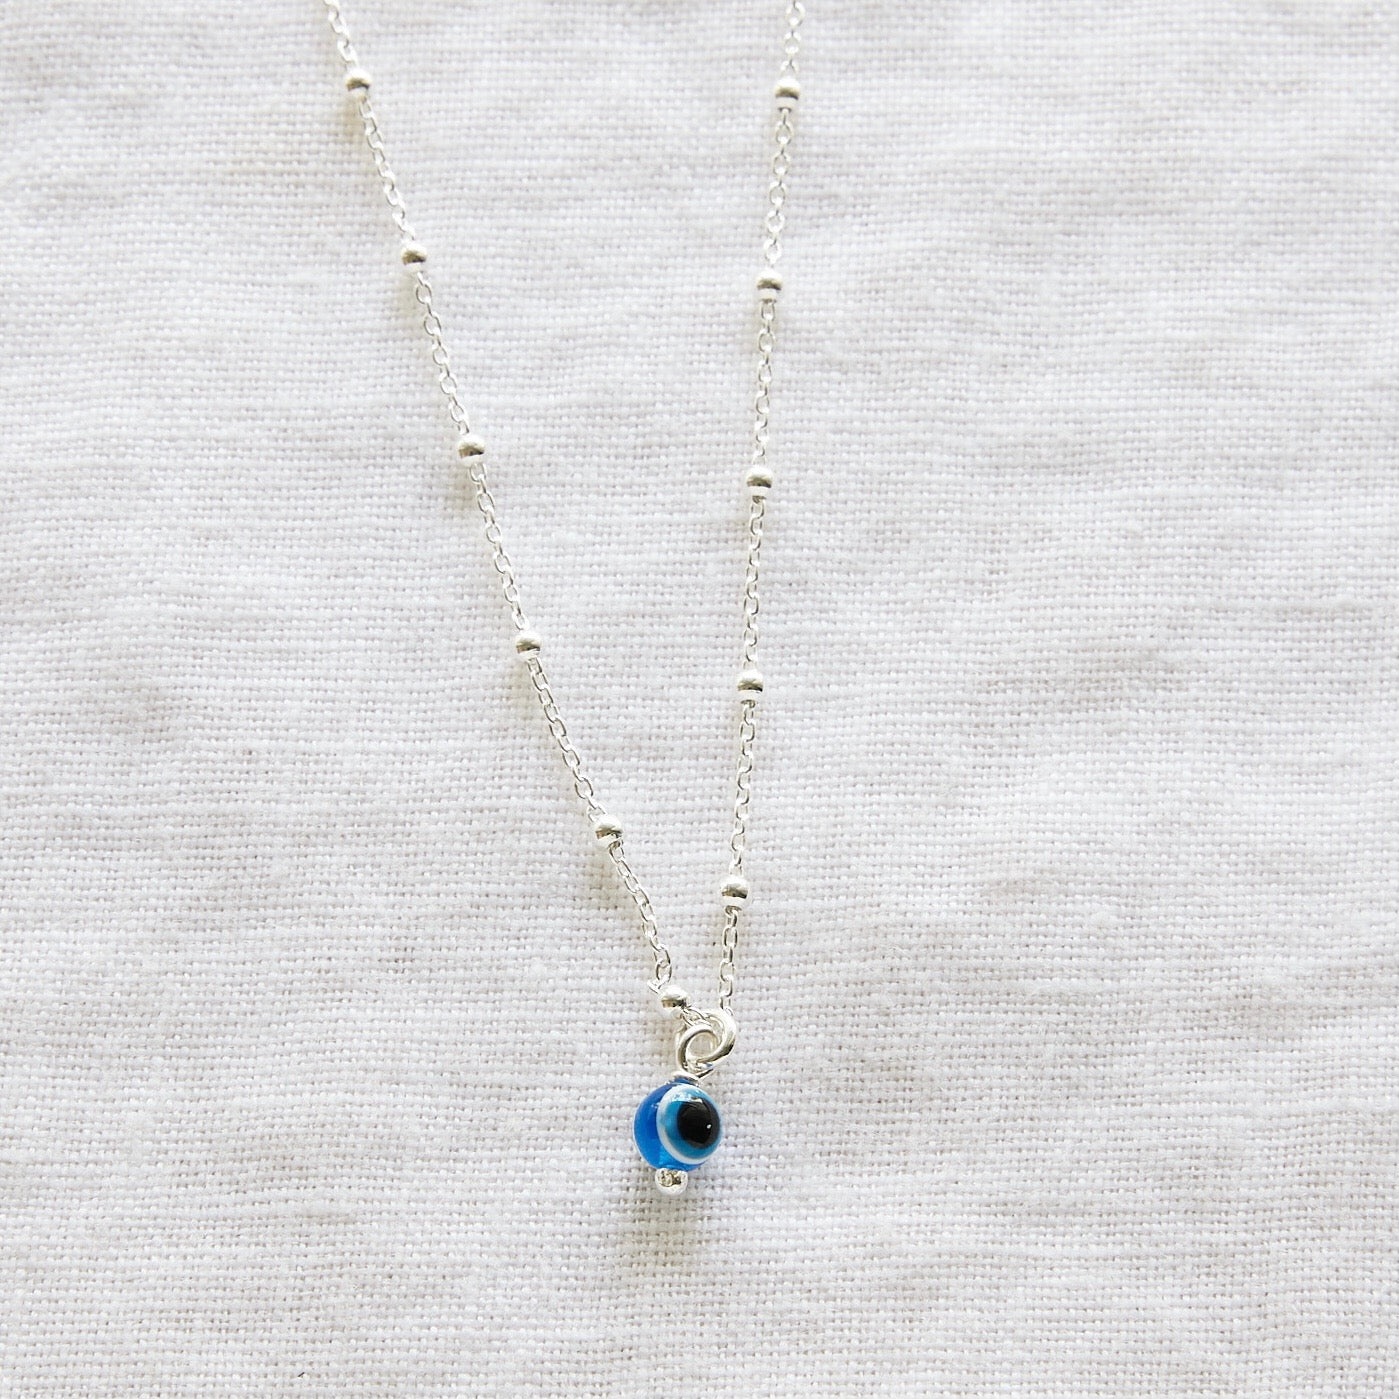 Evil eye sterling silver ball chain necklace